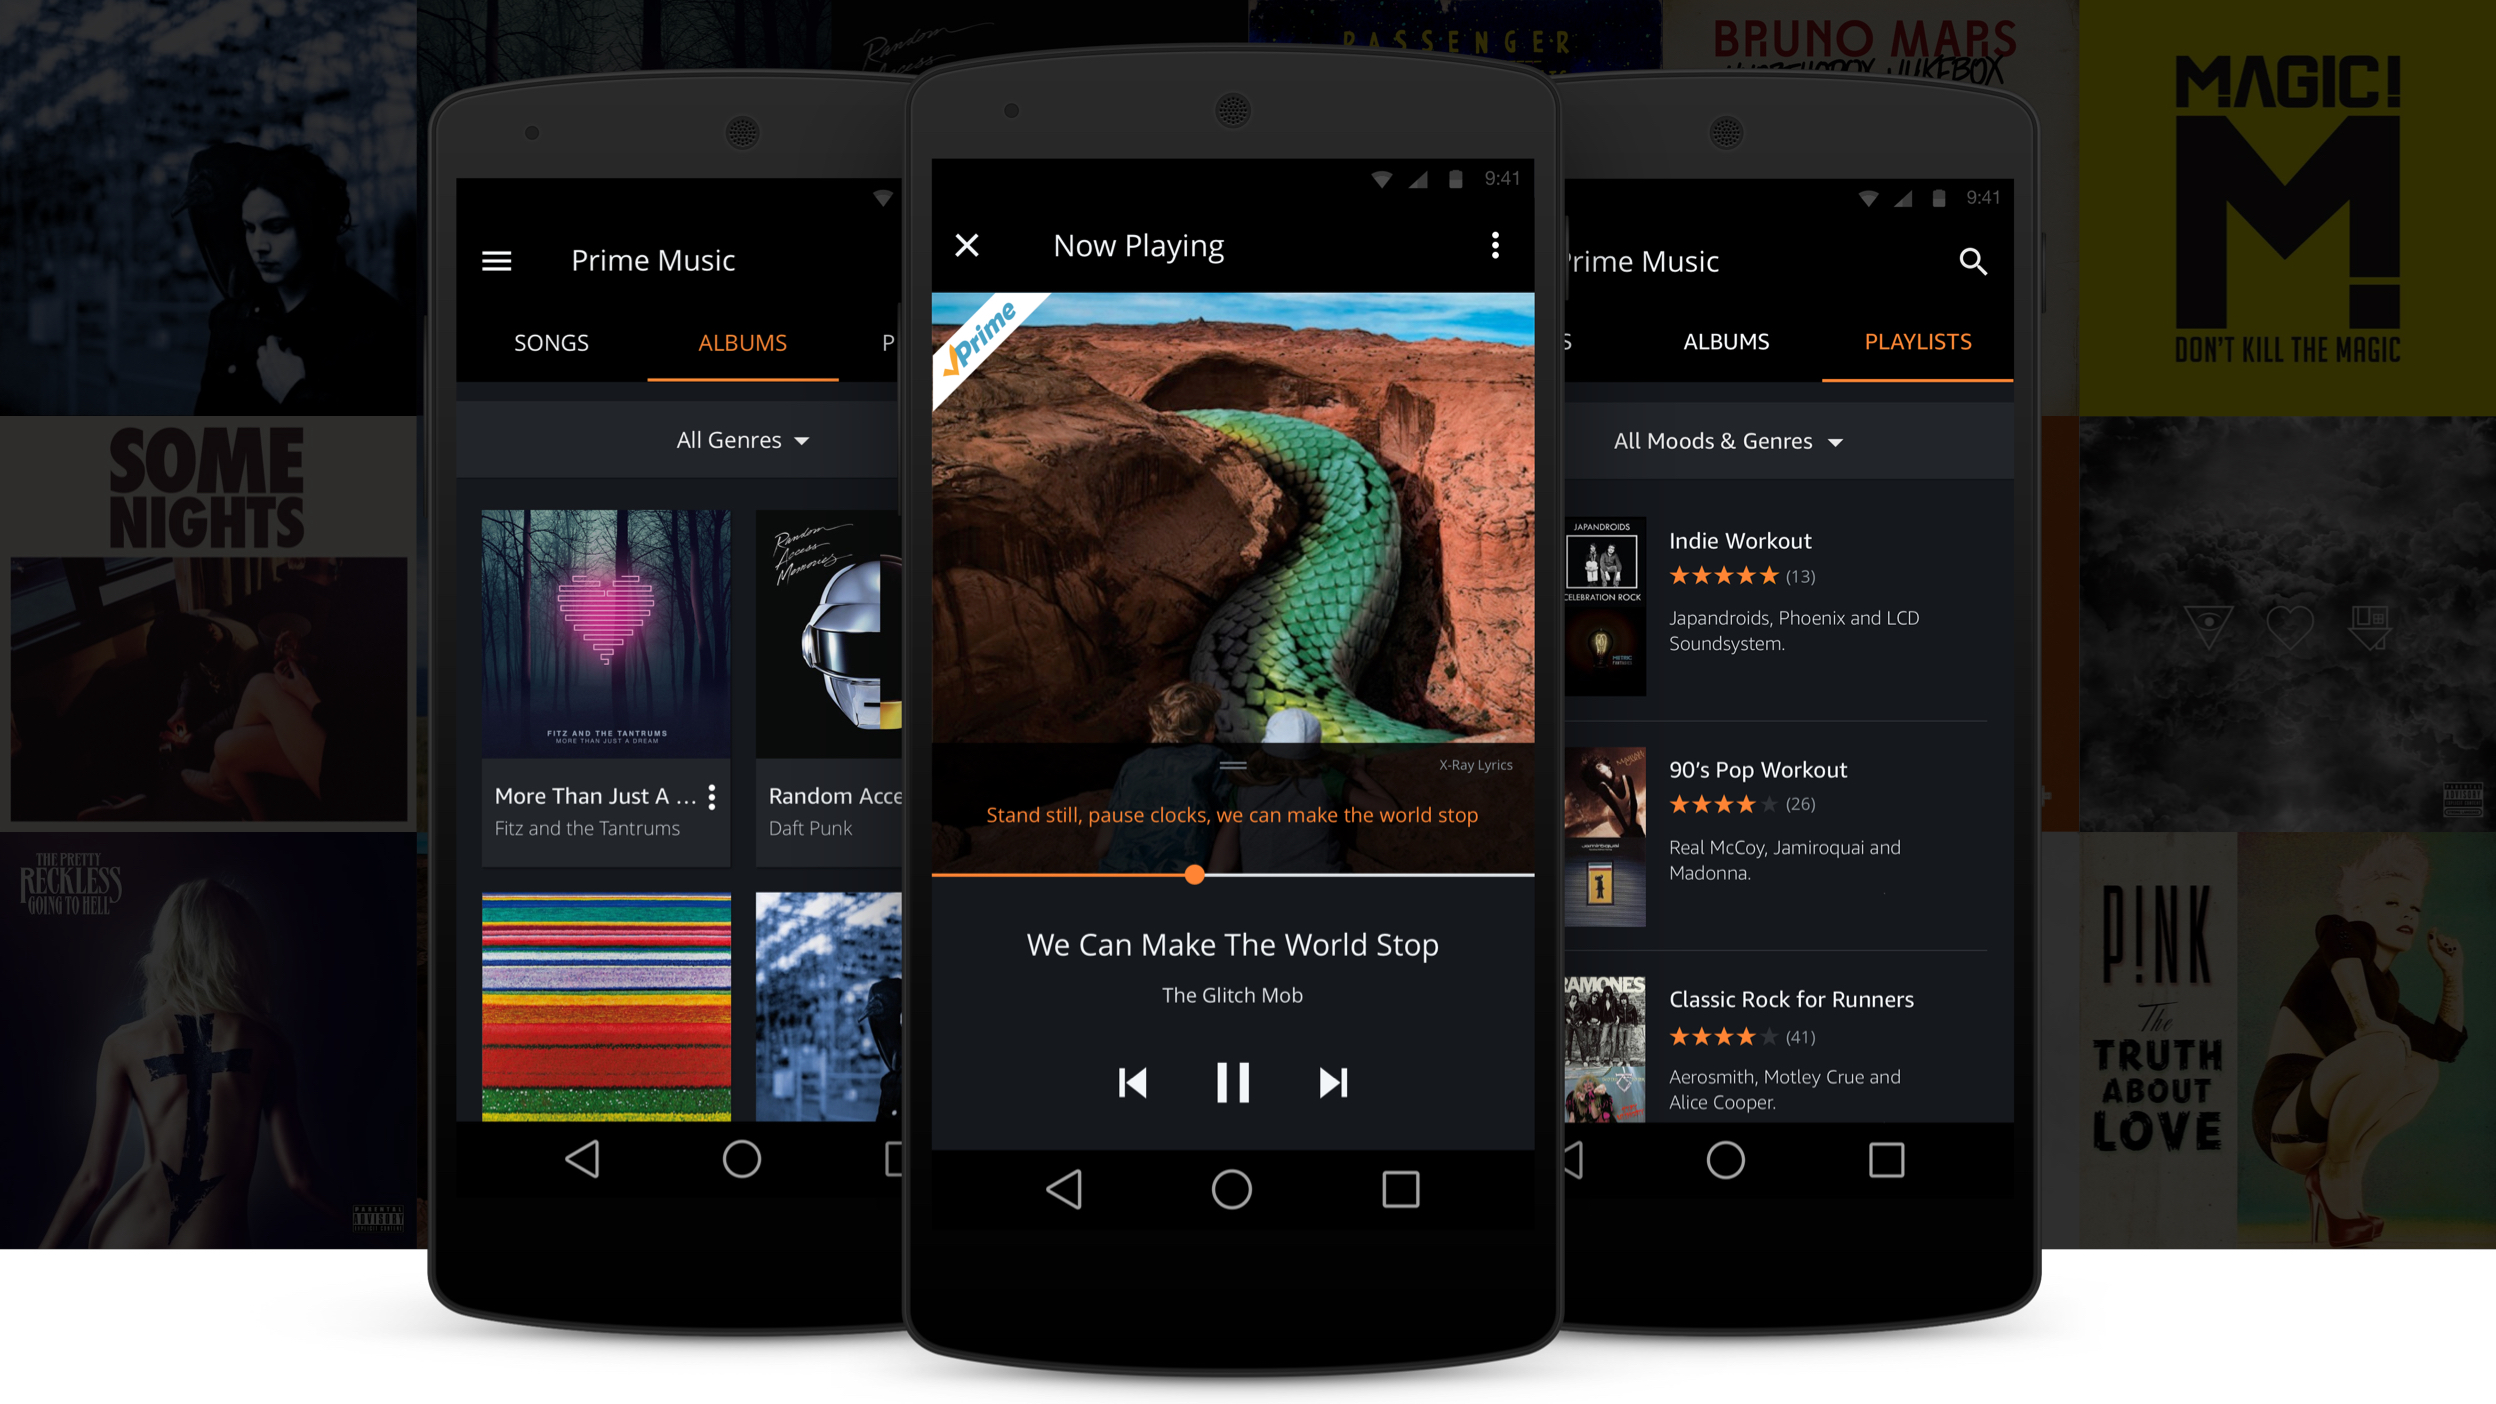 A fullscreen image showing 3 android phones with Prime music. The first phone shows the album section with four albums displayed in a grid. The albums include More than just a dream by fitz and the tantrums and Random access memories by daft punk. The next phone shows a picture of the now playing screen of Prime Music. This has large album art from the album We can make the world stop by the glitch mob. The screen also shows the lyrics 'stand still, pause clocks, we can make the world stop'. The third phone shows the Prime Playlists screen with the ability to filter by mood and genre. Three playlists are shown titles 'Indie Workout', '90s pop workout' and 'Classic Rock for Runners'.